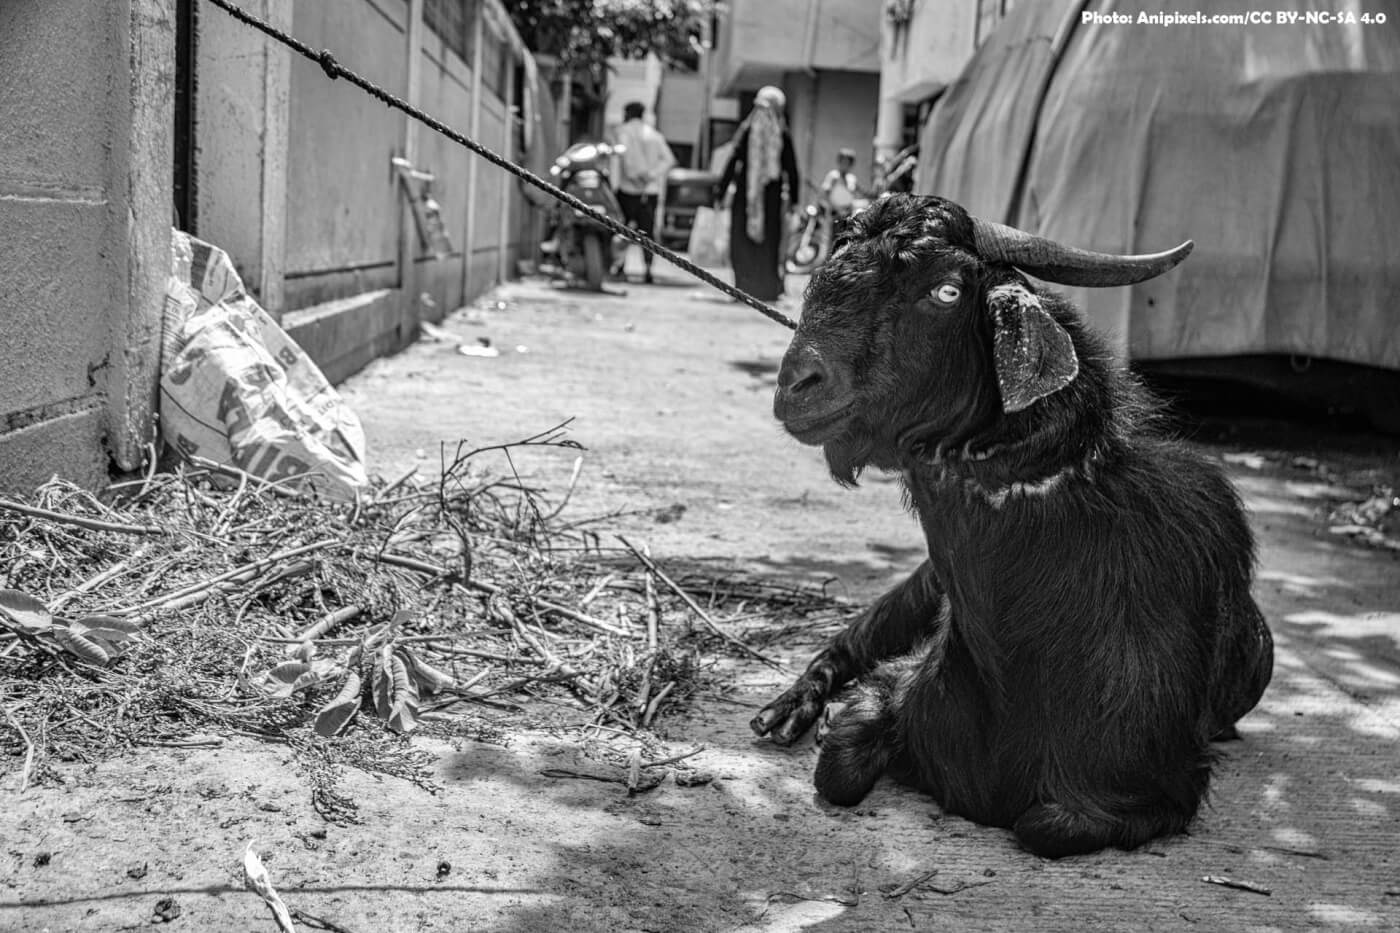 Animal Welfare Board Issues New Advisory to Stop Cruelty to Animals Ahead of Eid al-Adha Following a PETA India Appeal